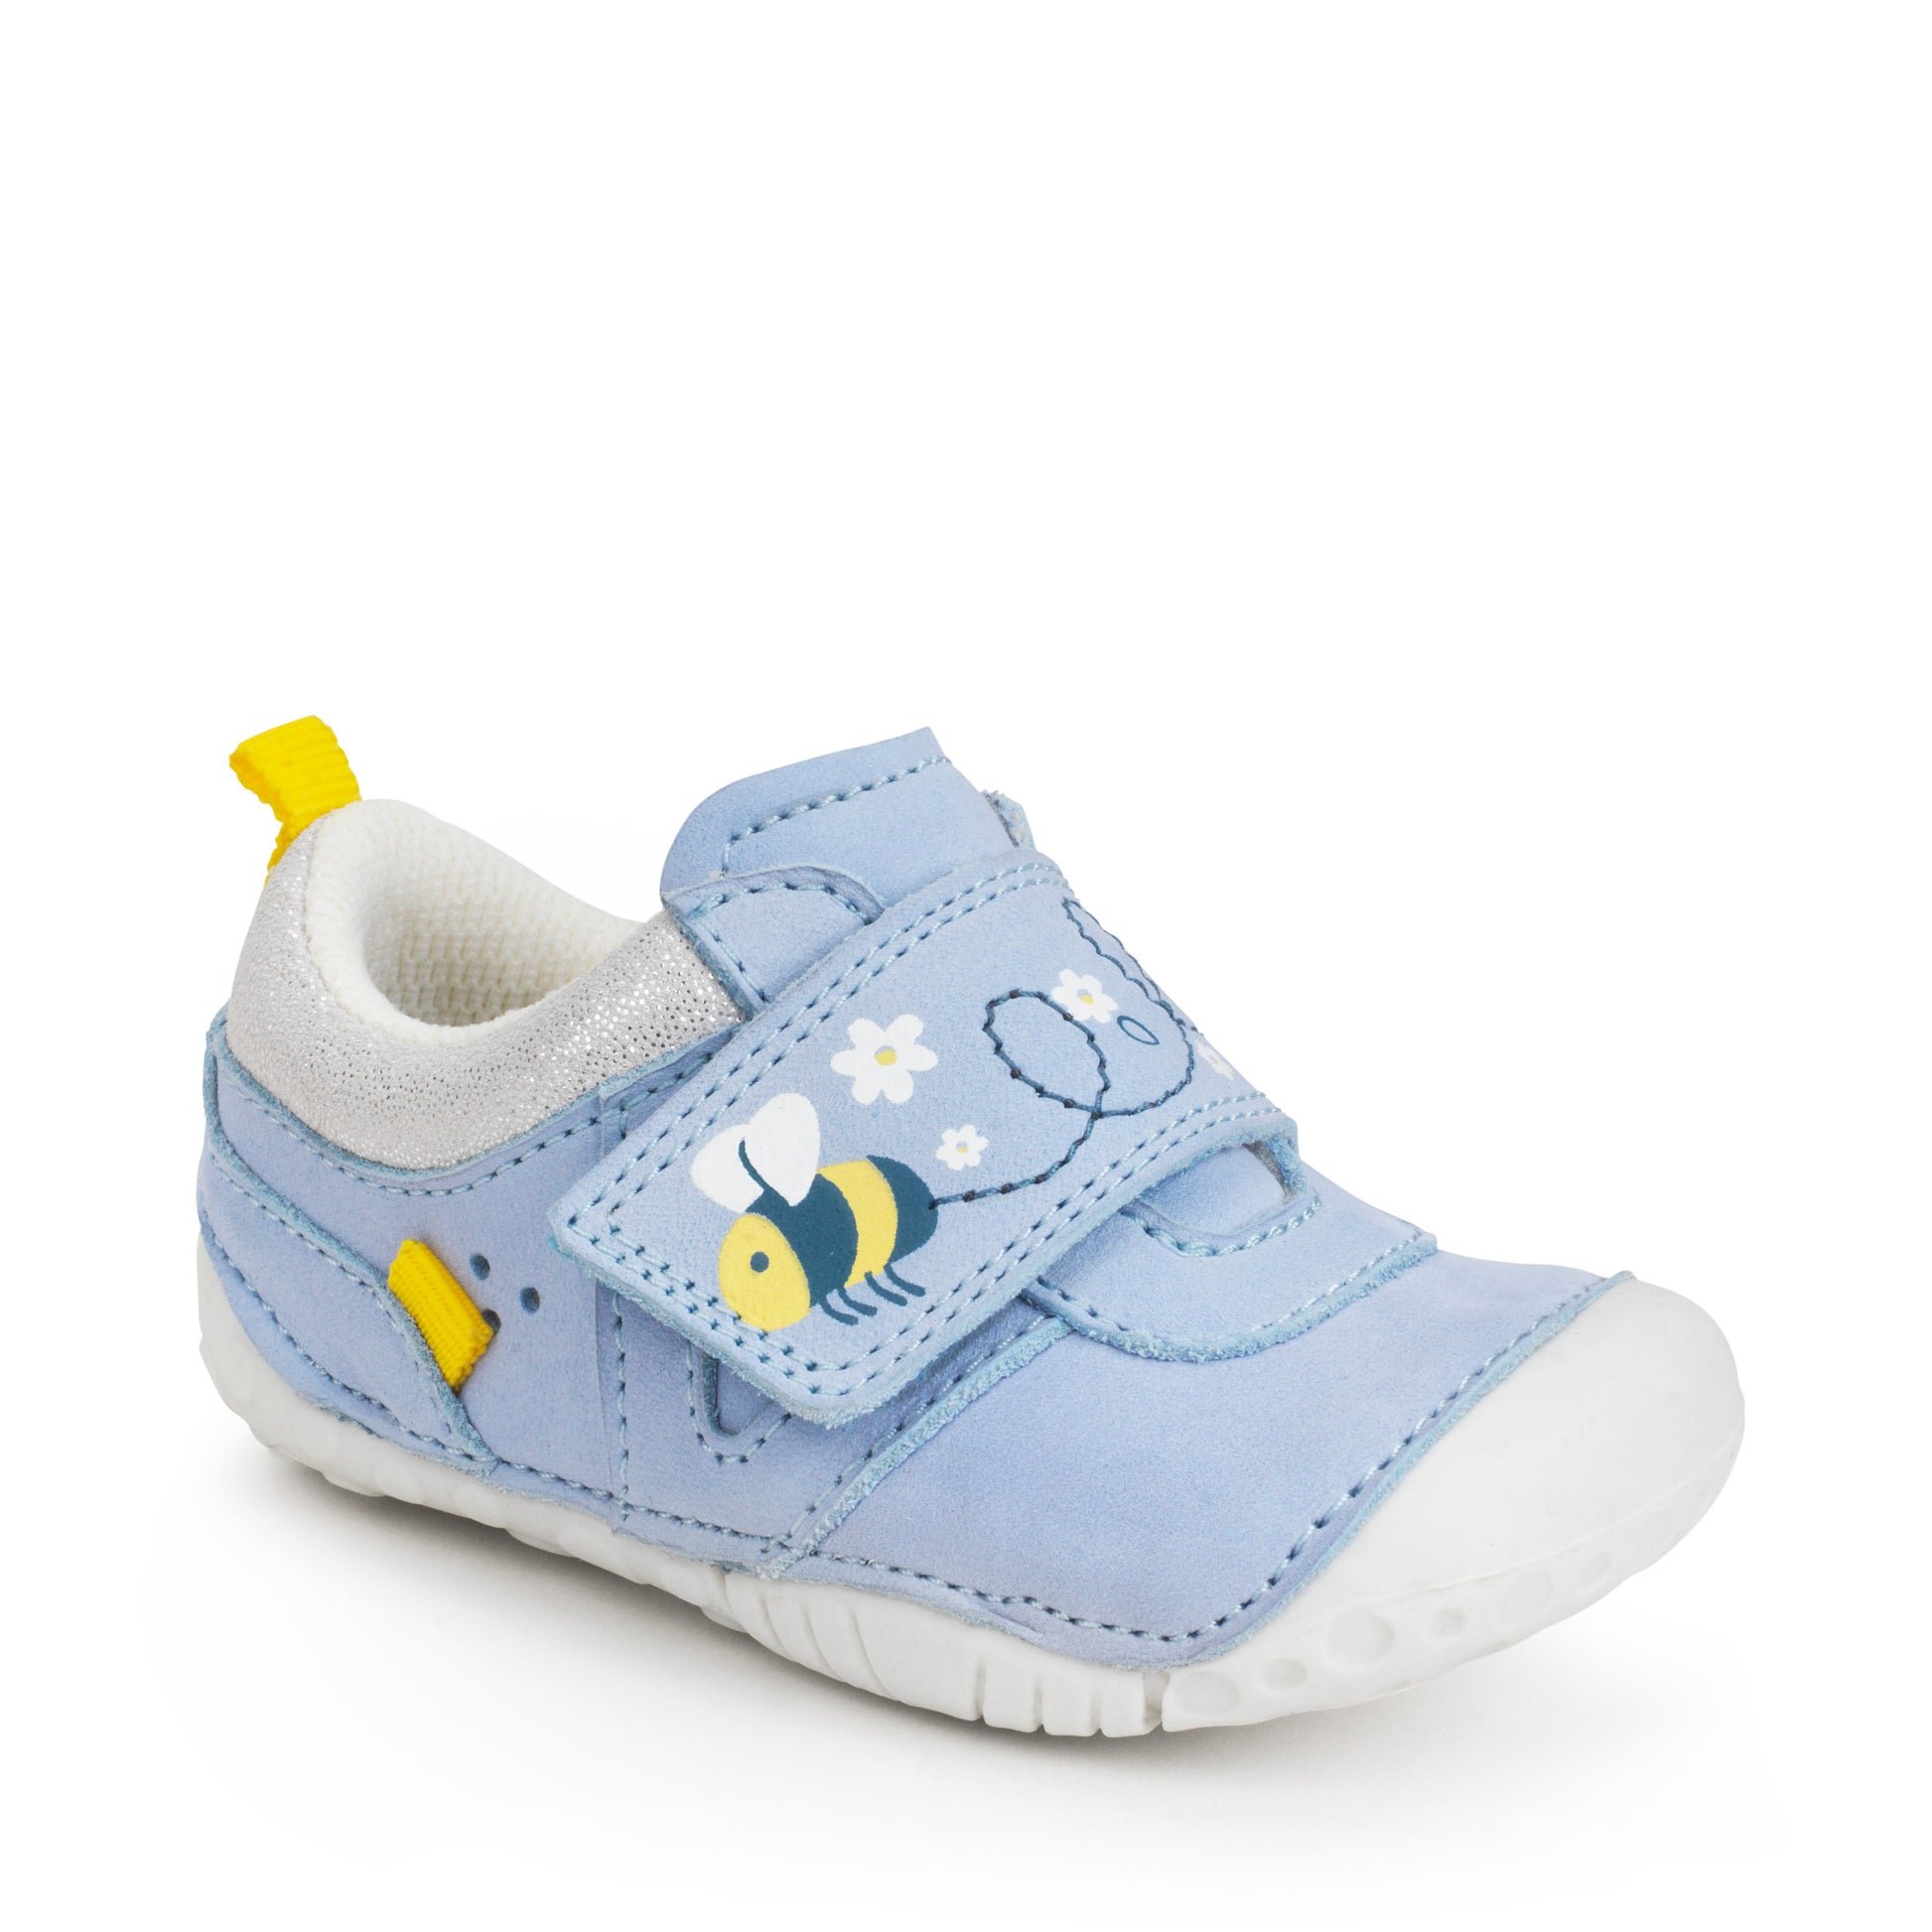 A girls pre walker by Start Rite, style Little Mate,in pale blue with bee motif and velcro fastening. Angled view